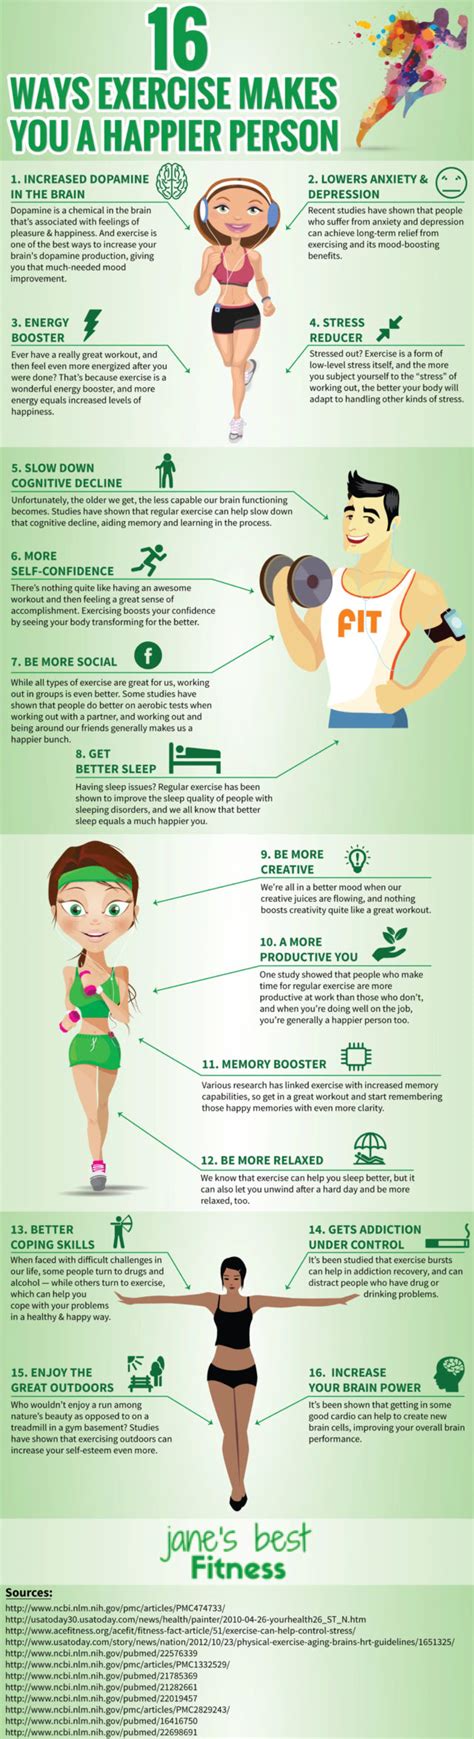 16 Ways To Build Your Happiness Quotient With Exercise Infographic